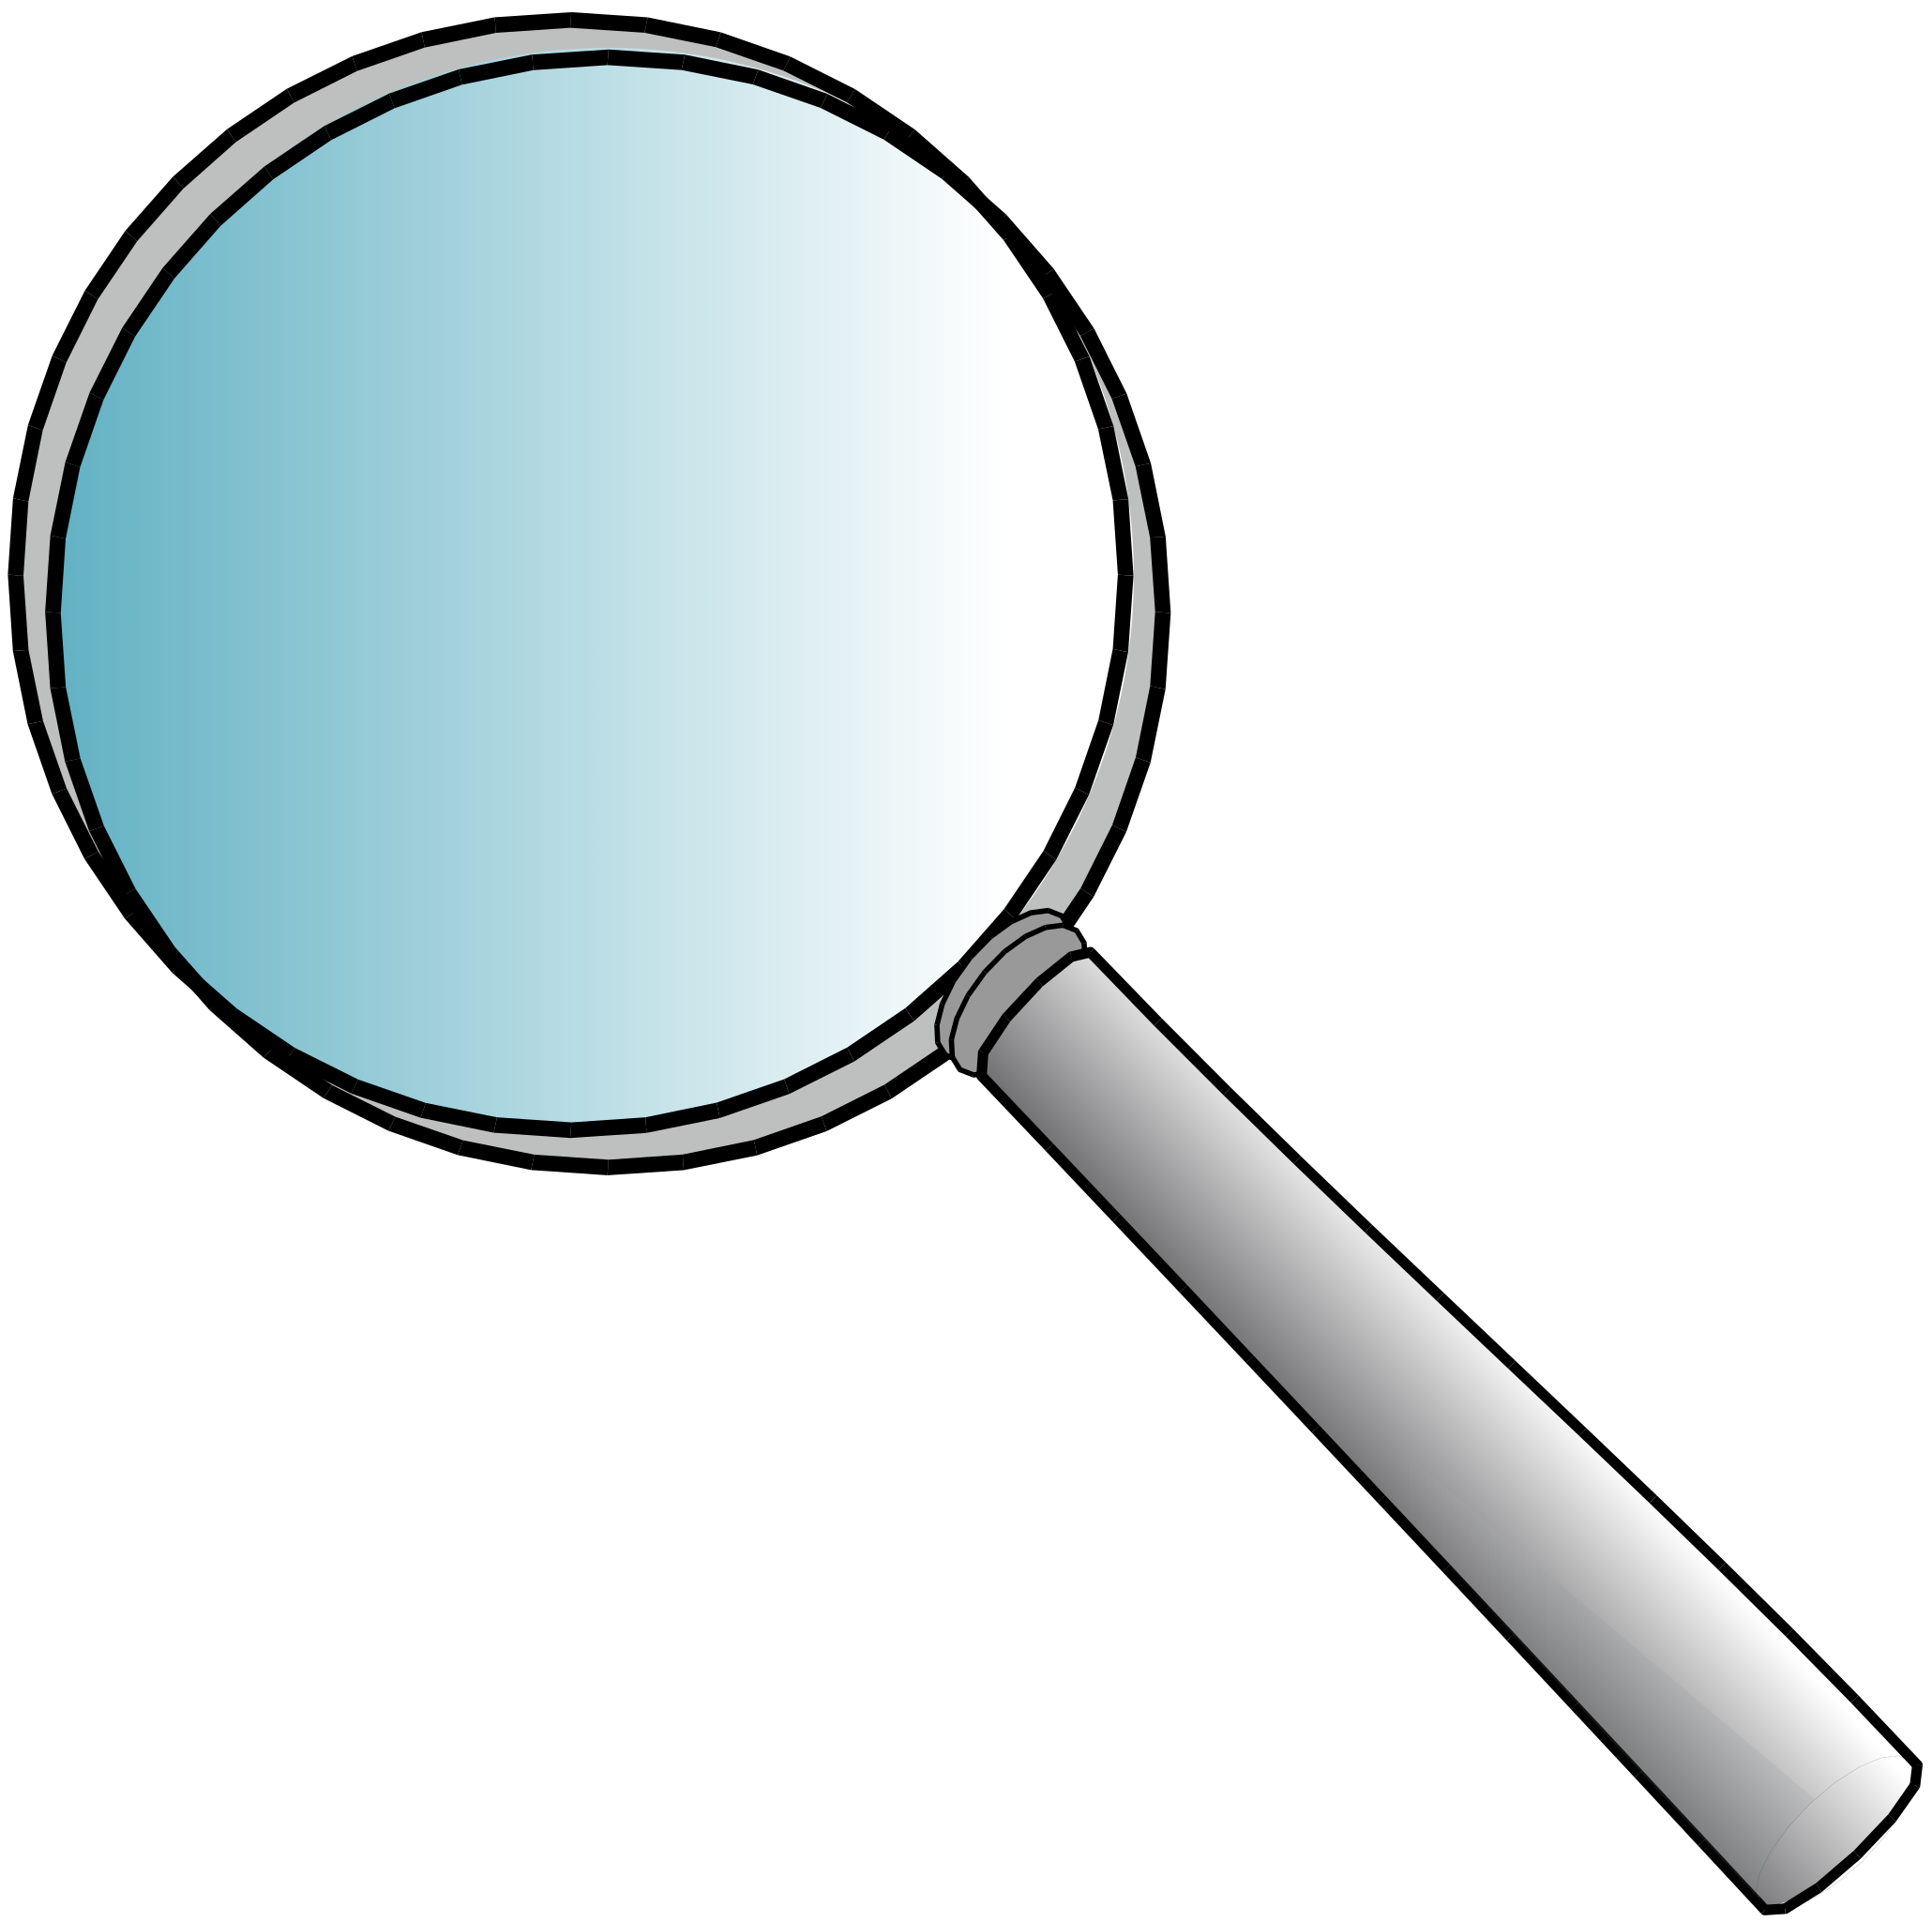 https://upload.wikimedia.org/wikipedia/commons/thumb/3/3a/Magnifying_glass_01.svg/2060px-Magnifying_glass_01.svg.png